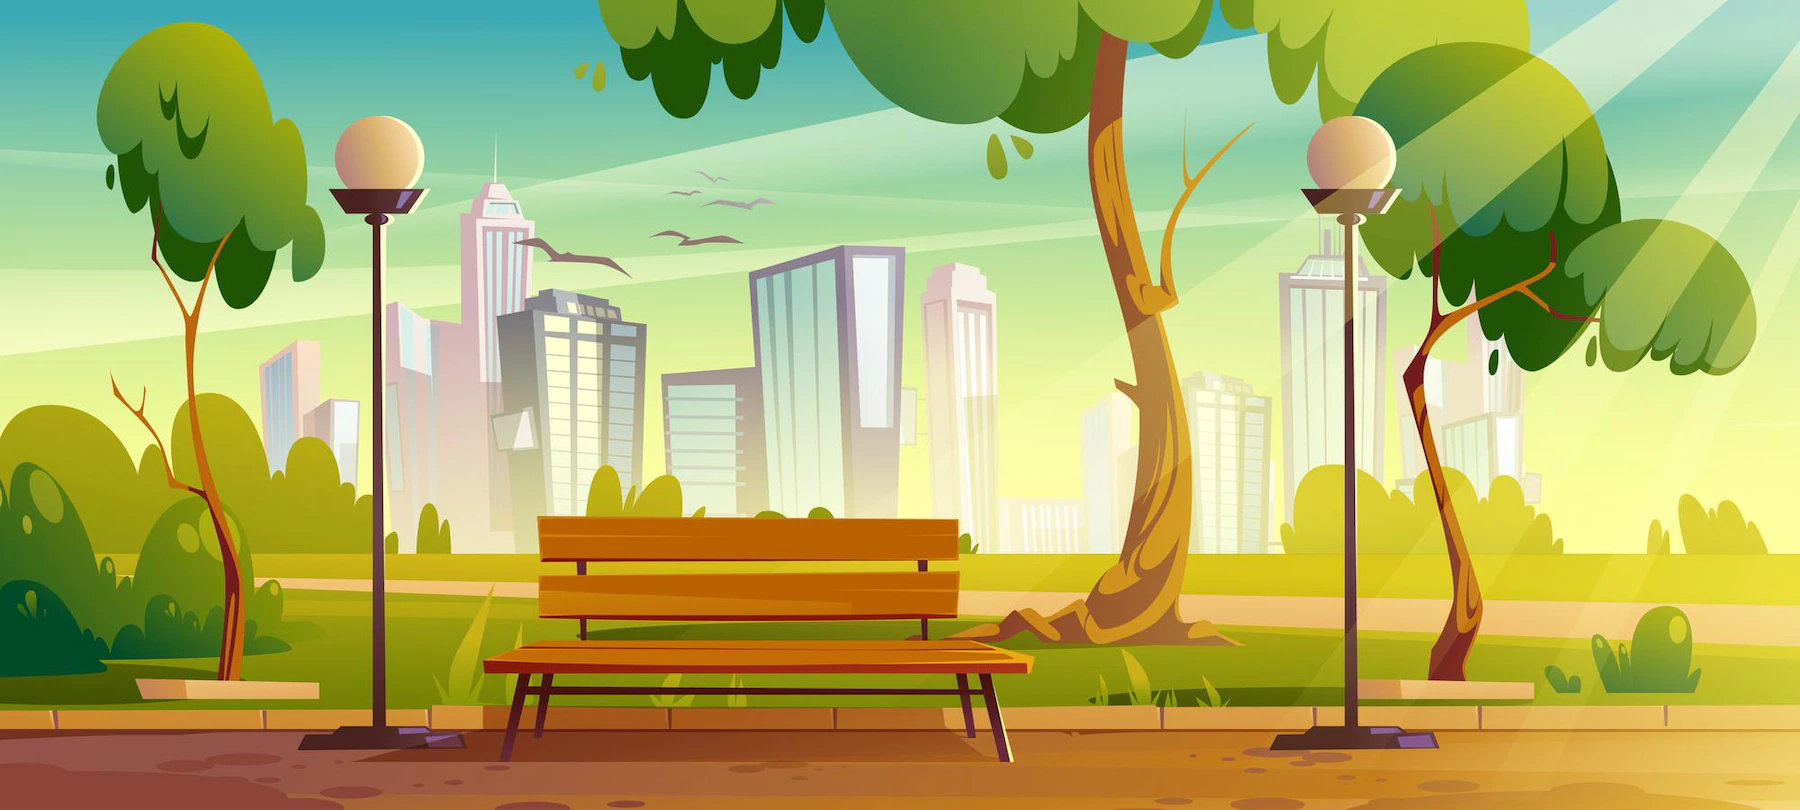 city park with green trees grass wooden bench lanterns town buildings skyline 107791 5378